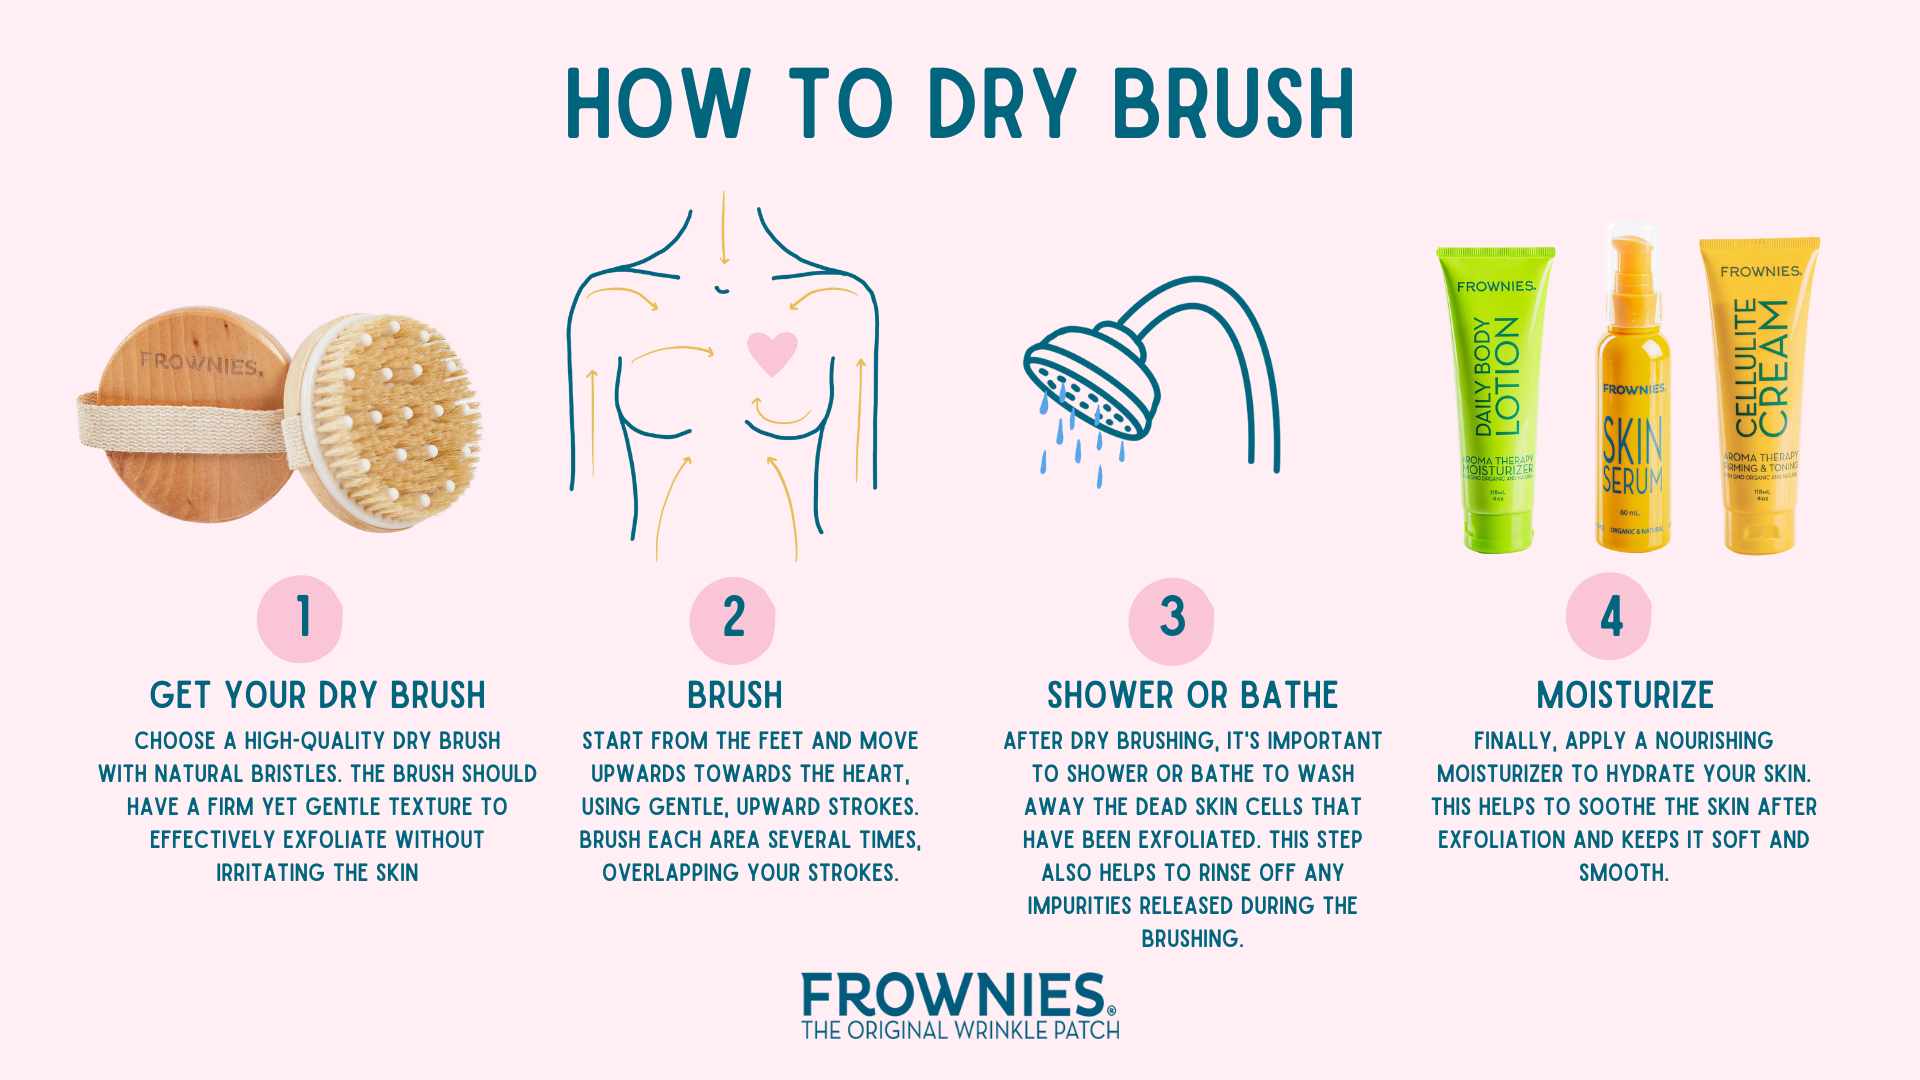 steps detailing how to dry brush